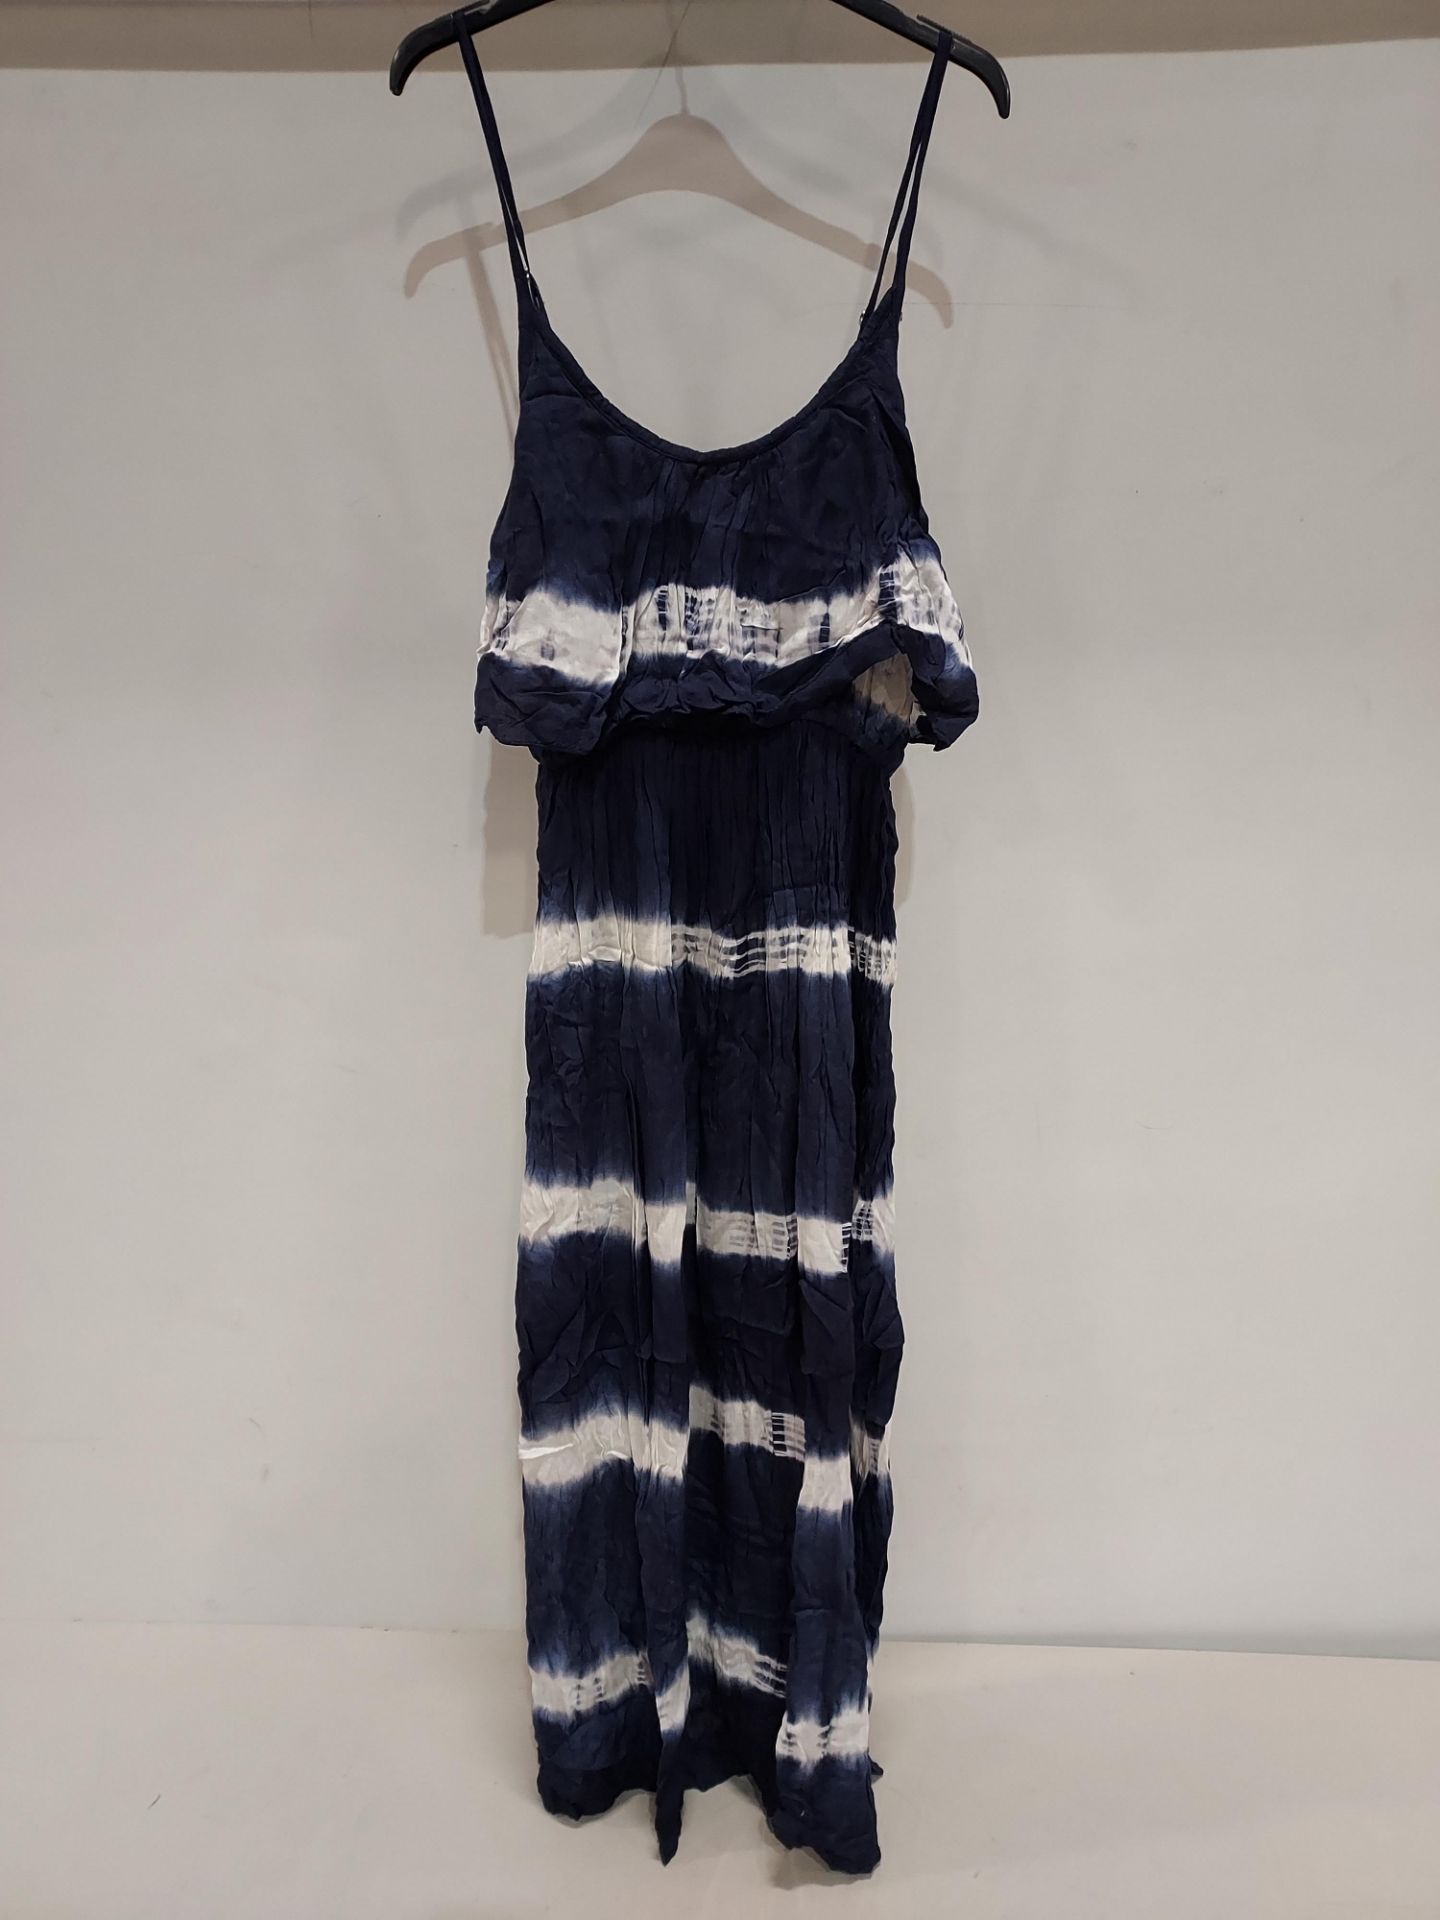 11 X BRAND NEW LONG MAXI PISTACHIO DRESSES IN BLUE TIE DIE SIZE SMALL (RRP £29.99 EACH TOTAL RRP £